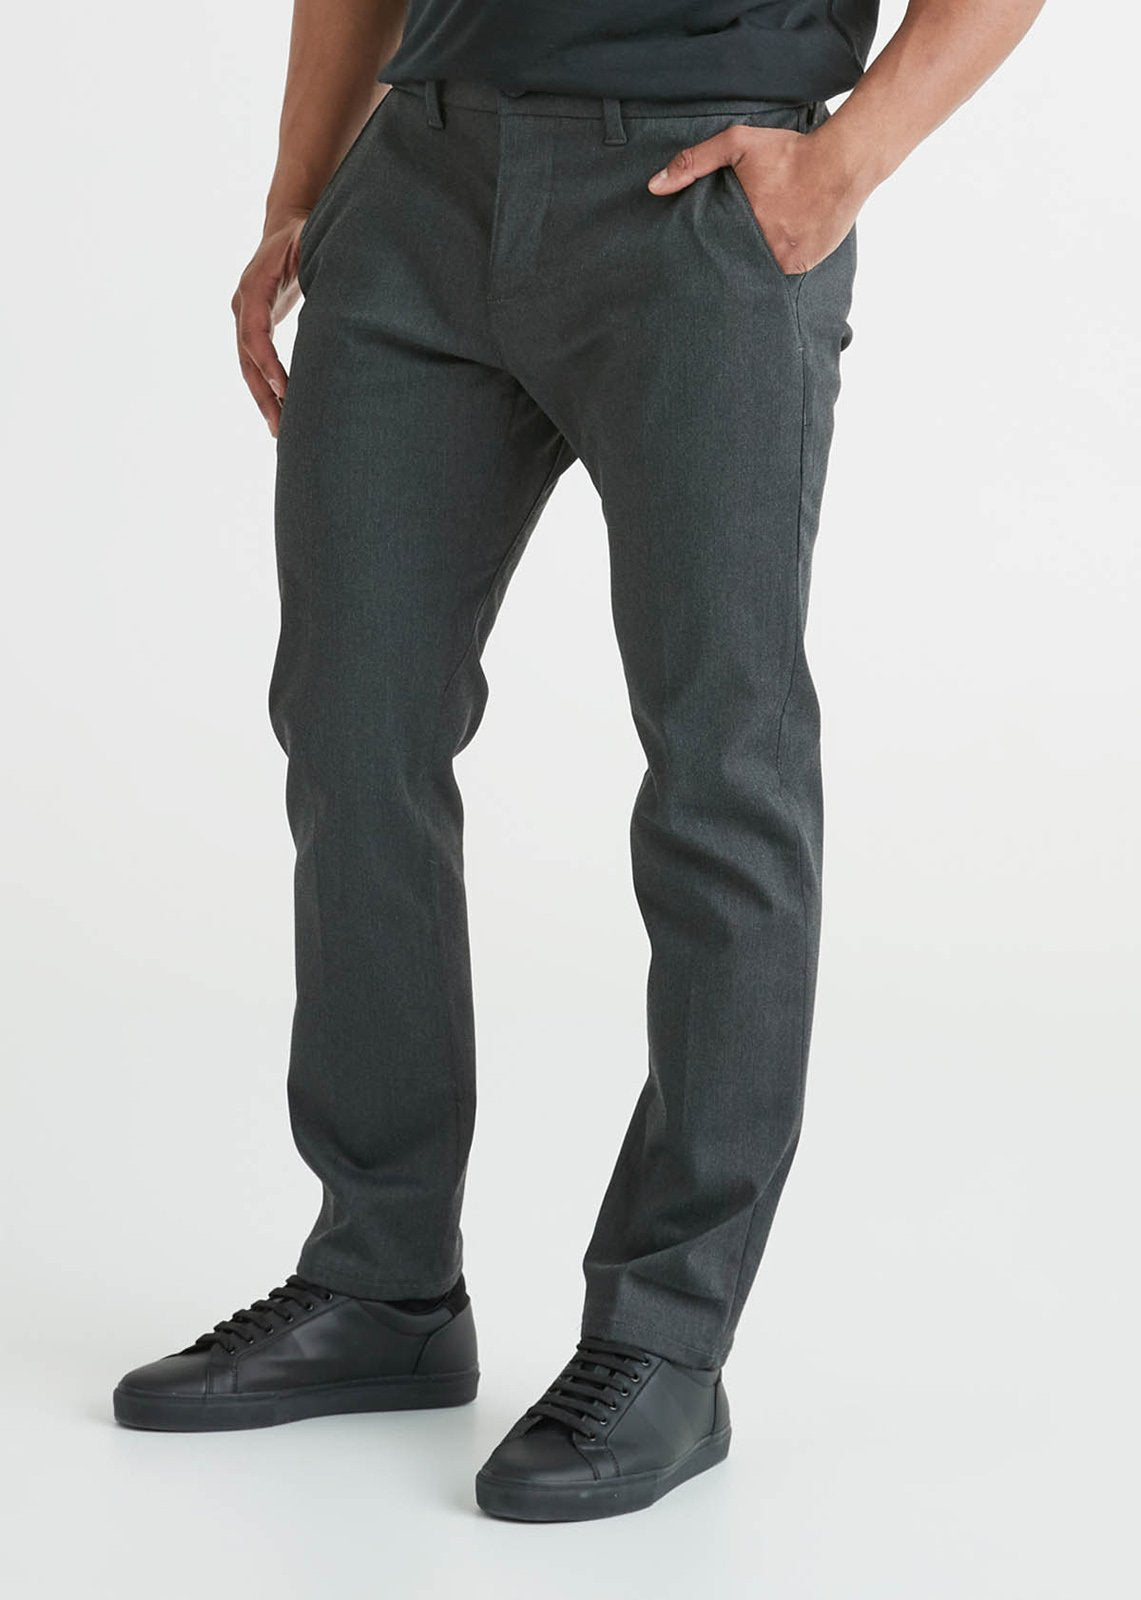 Men's Relaxed Fit Stretch Cargo Pant,Men's Slim-Fit Vintage Comfort Stretch Cargo  Pant at  Men's Clothing store